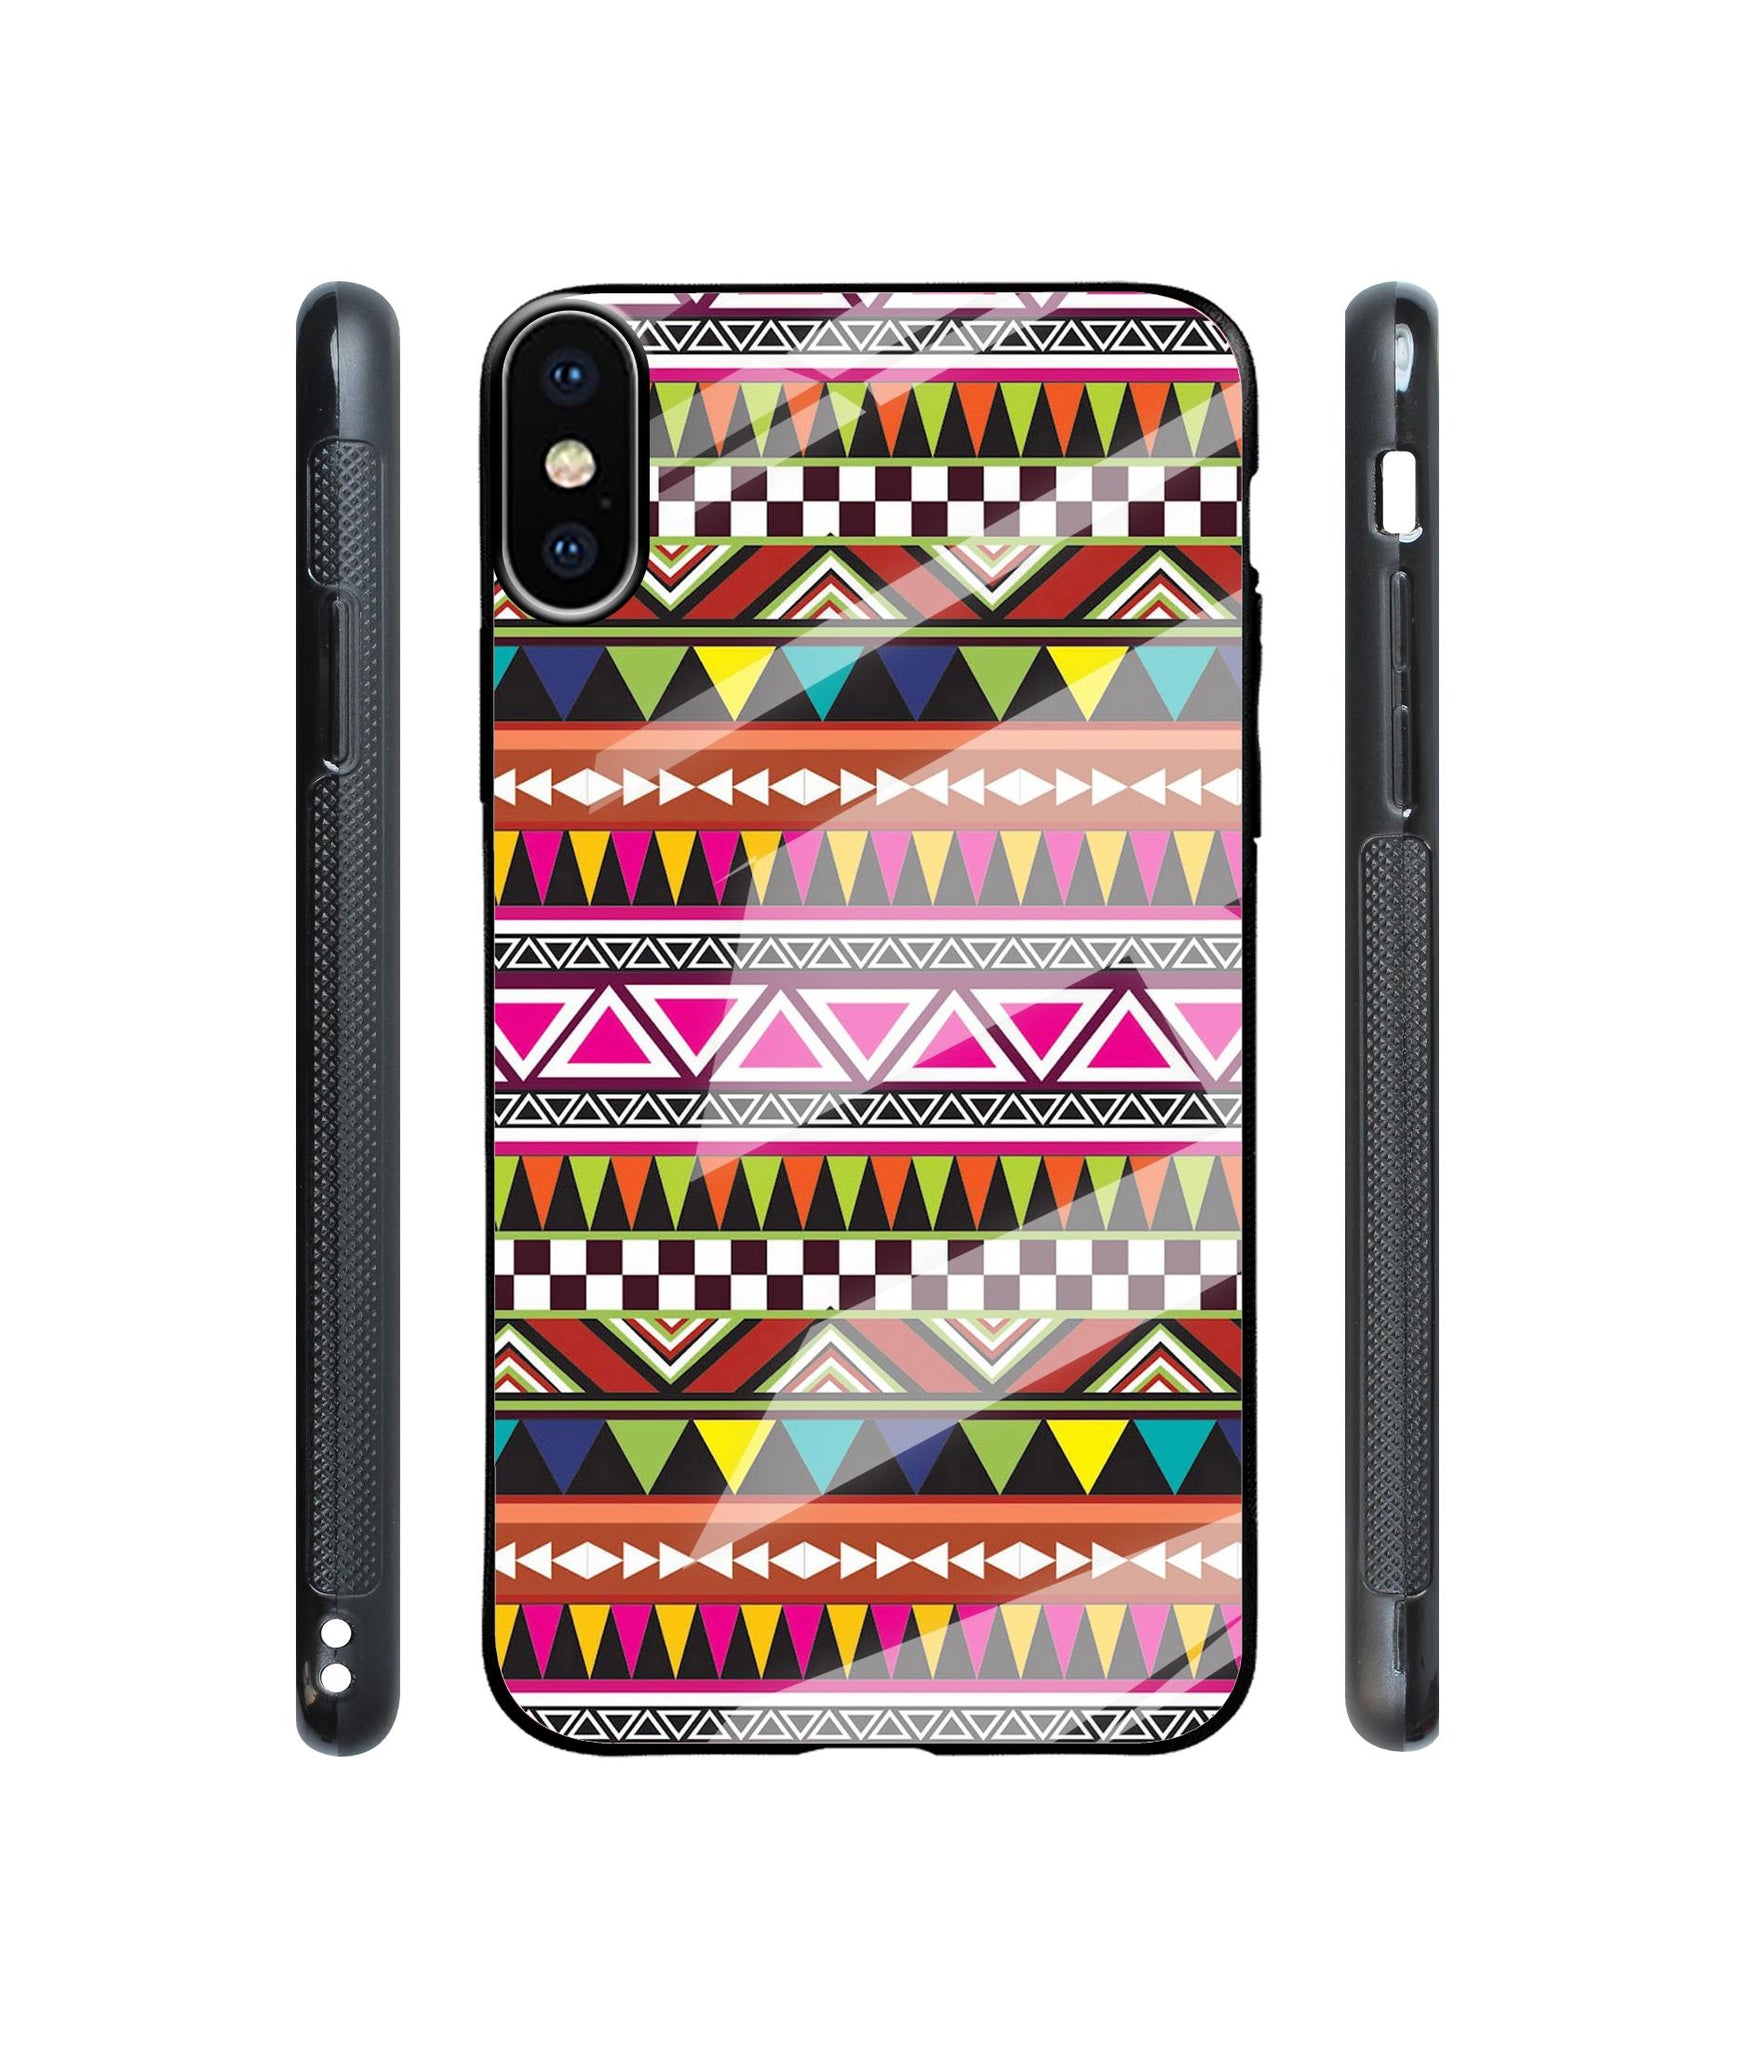 Azatel Designer Printed Glass Cover for Apple iPhone X / Xs